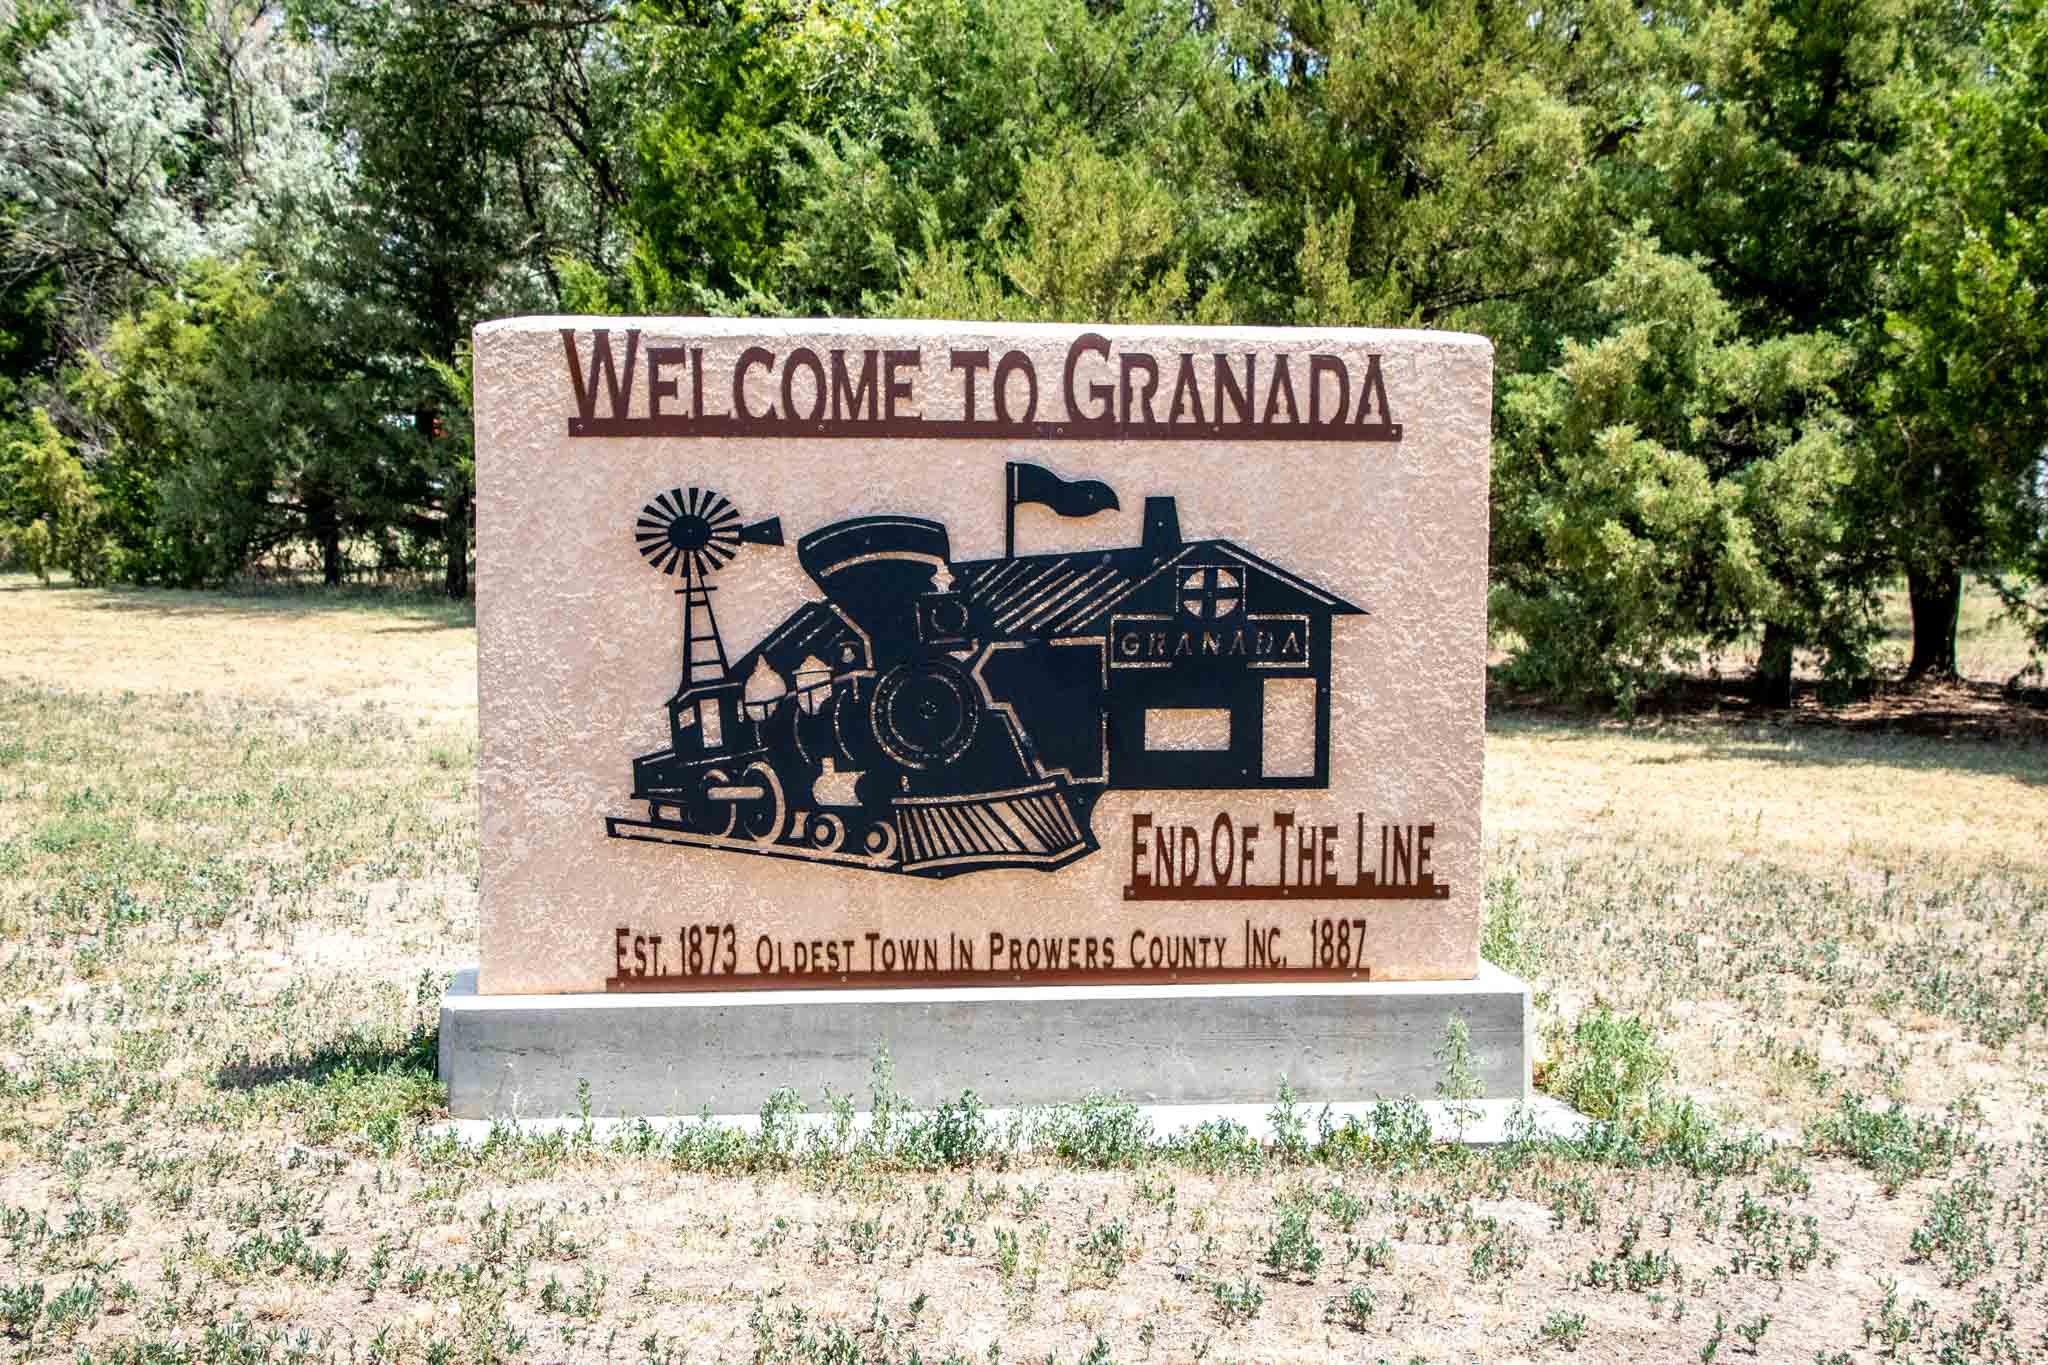 Sign saying Welcome to Granada, End of the Line, Established 1873, oldest town in Prowers County